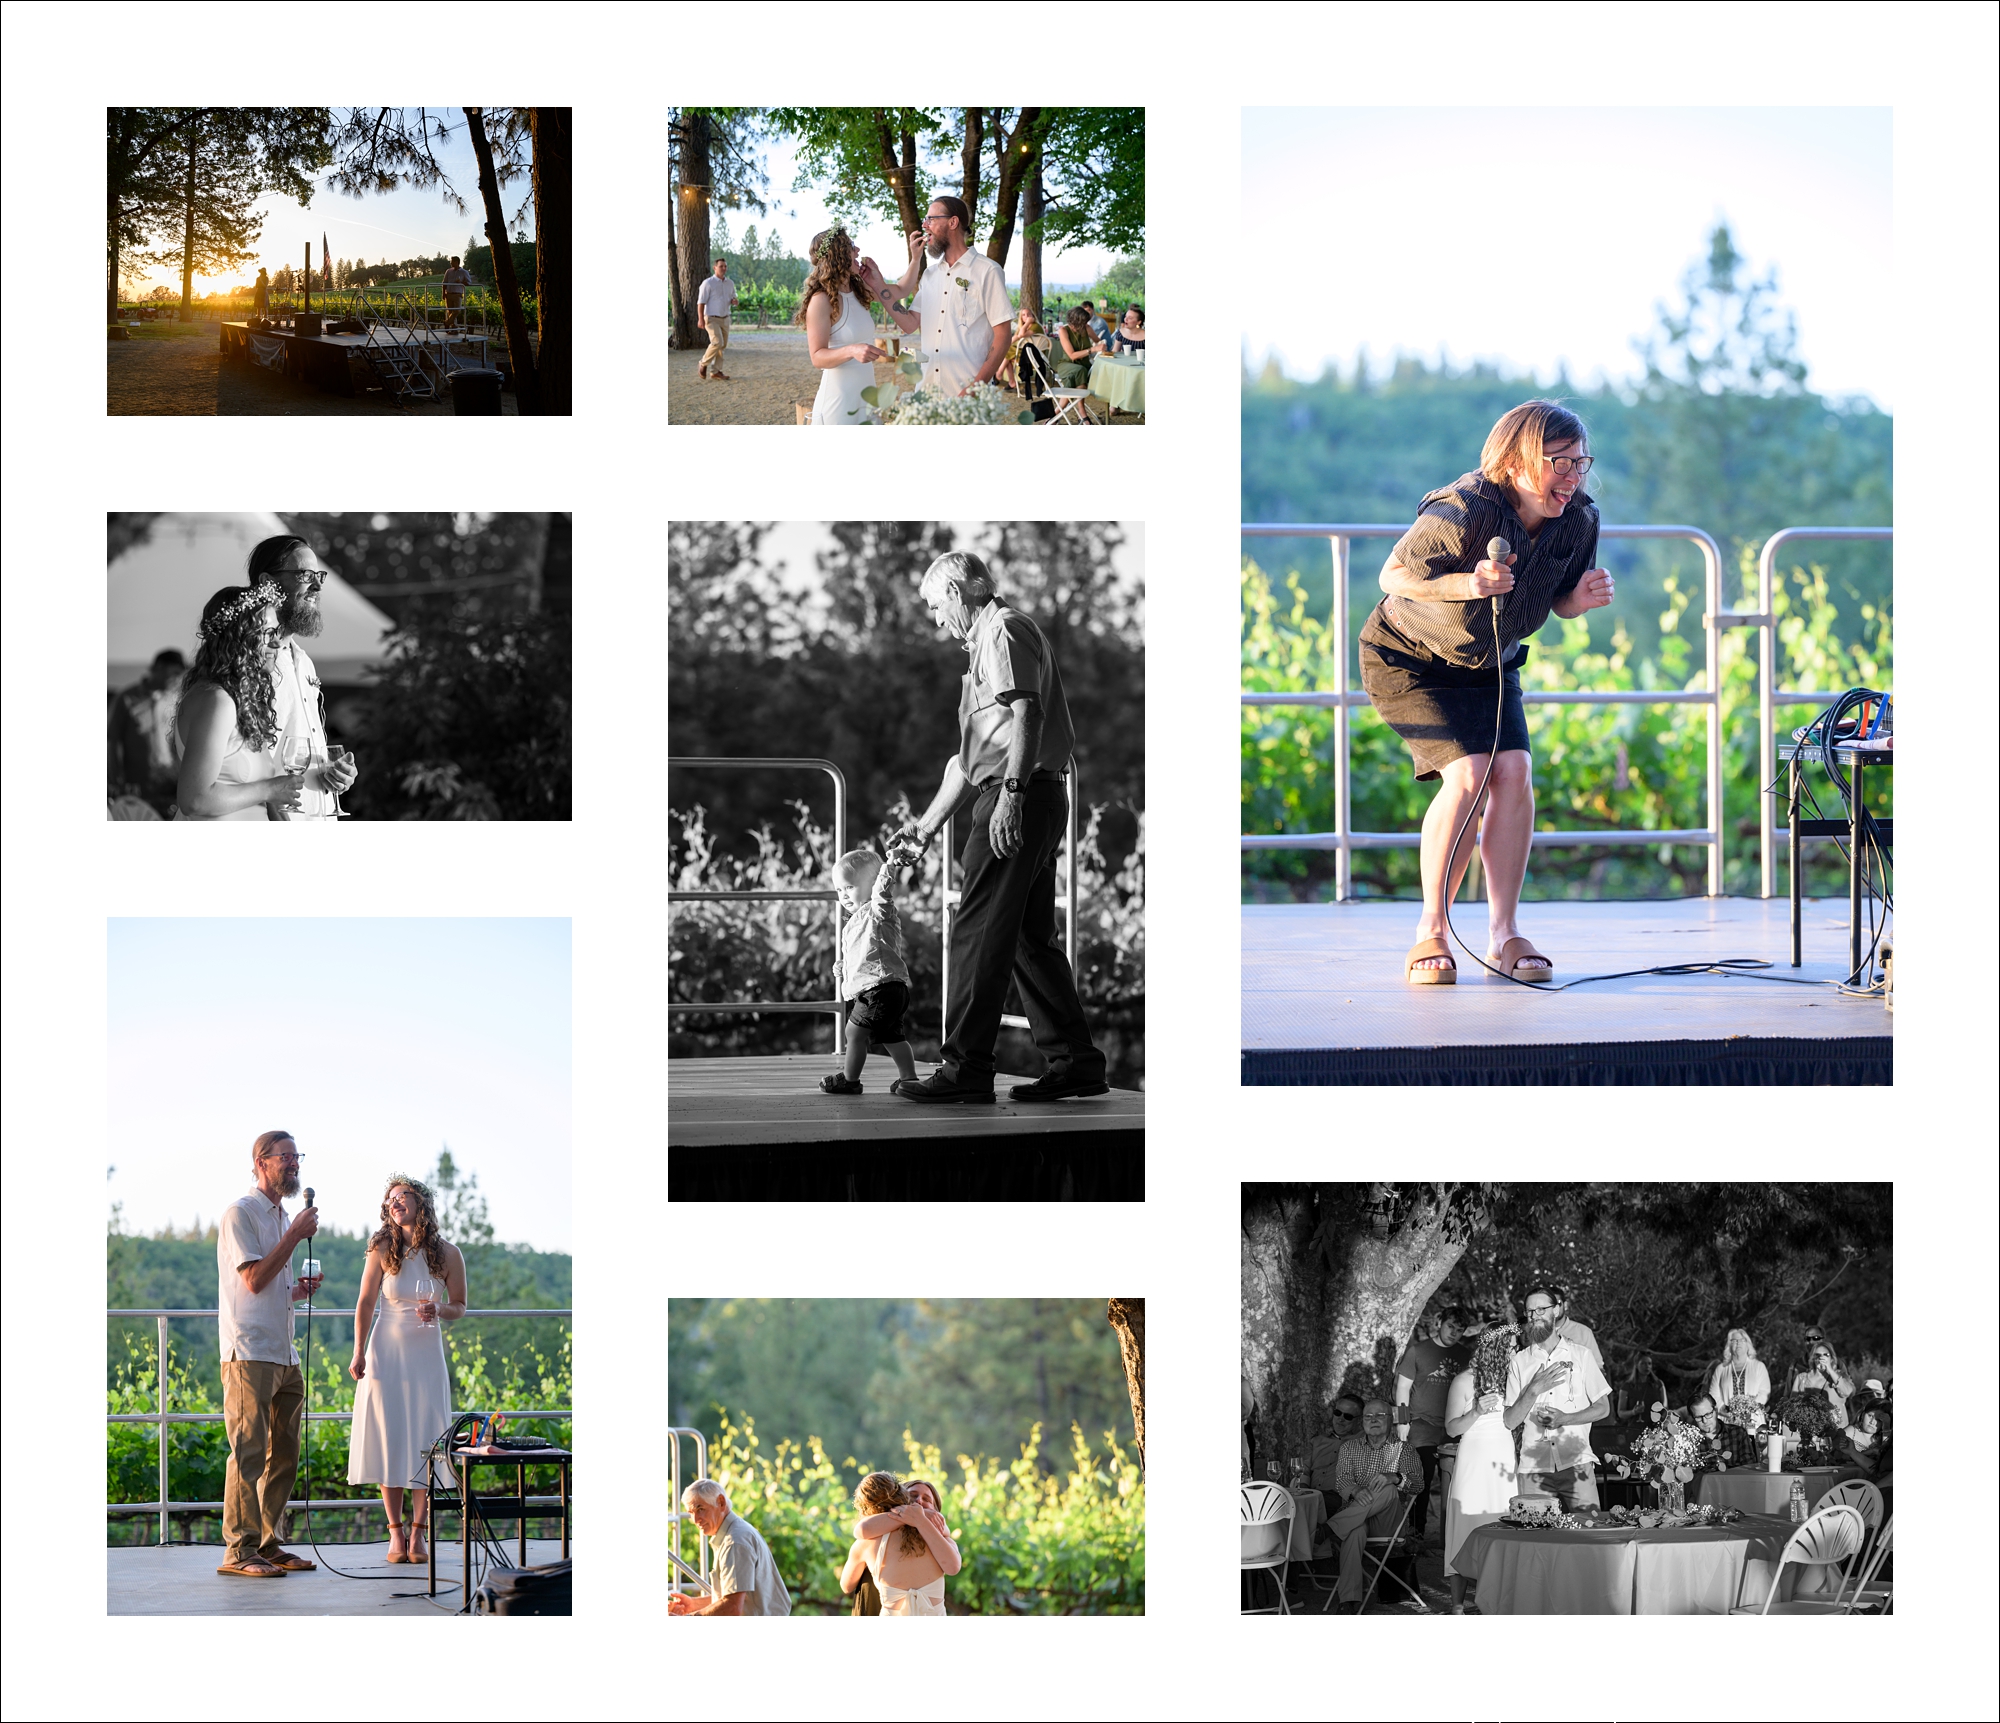 Whitney and Spencer celebrate their marriage at Sierra Vista Vineyards